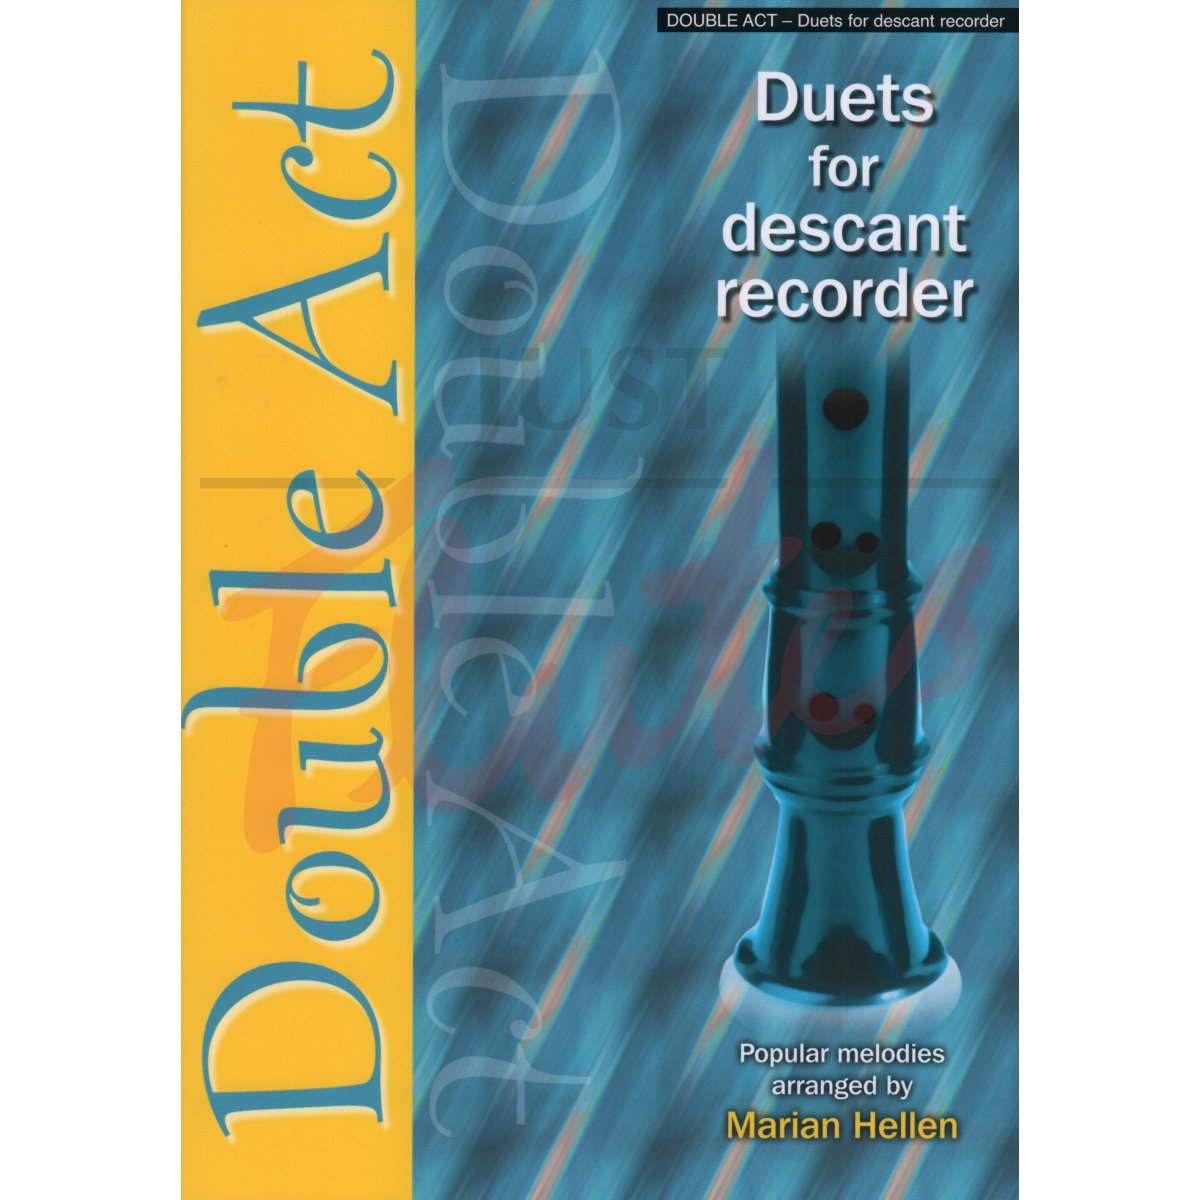 Double Act: Duets for Descant Recorder